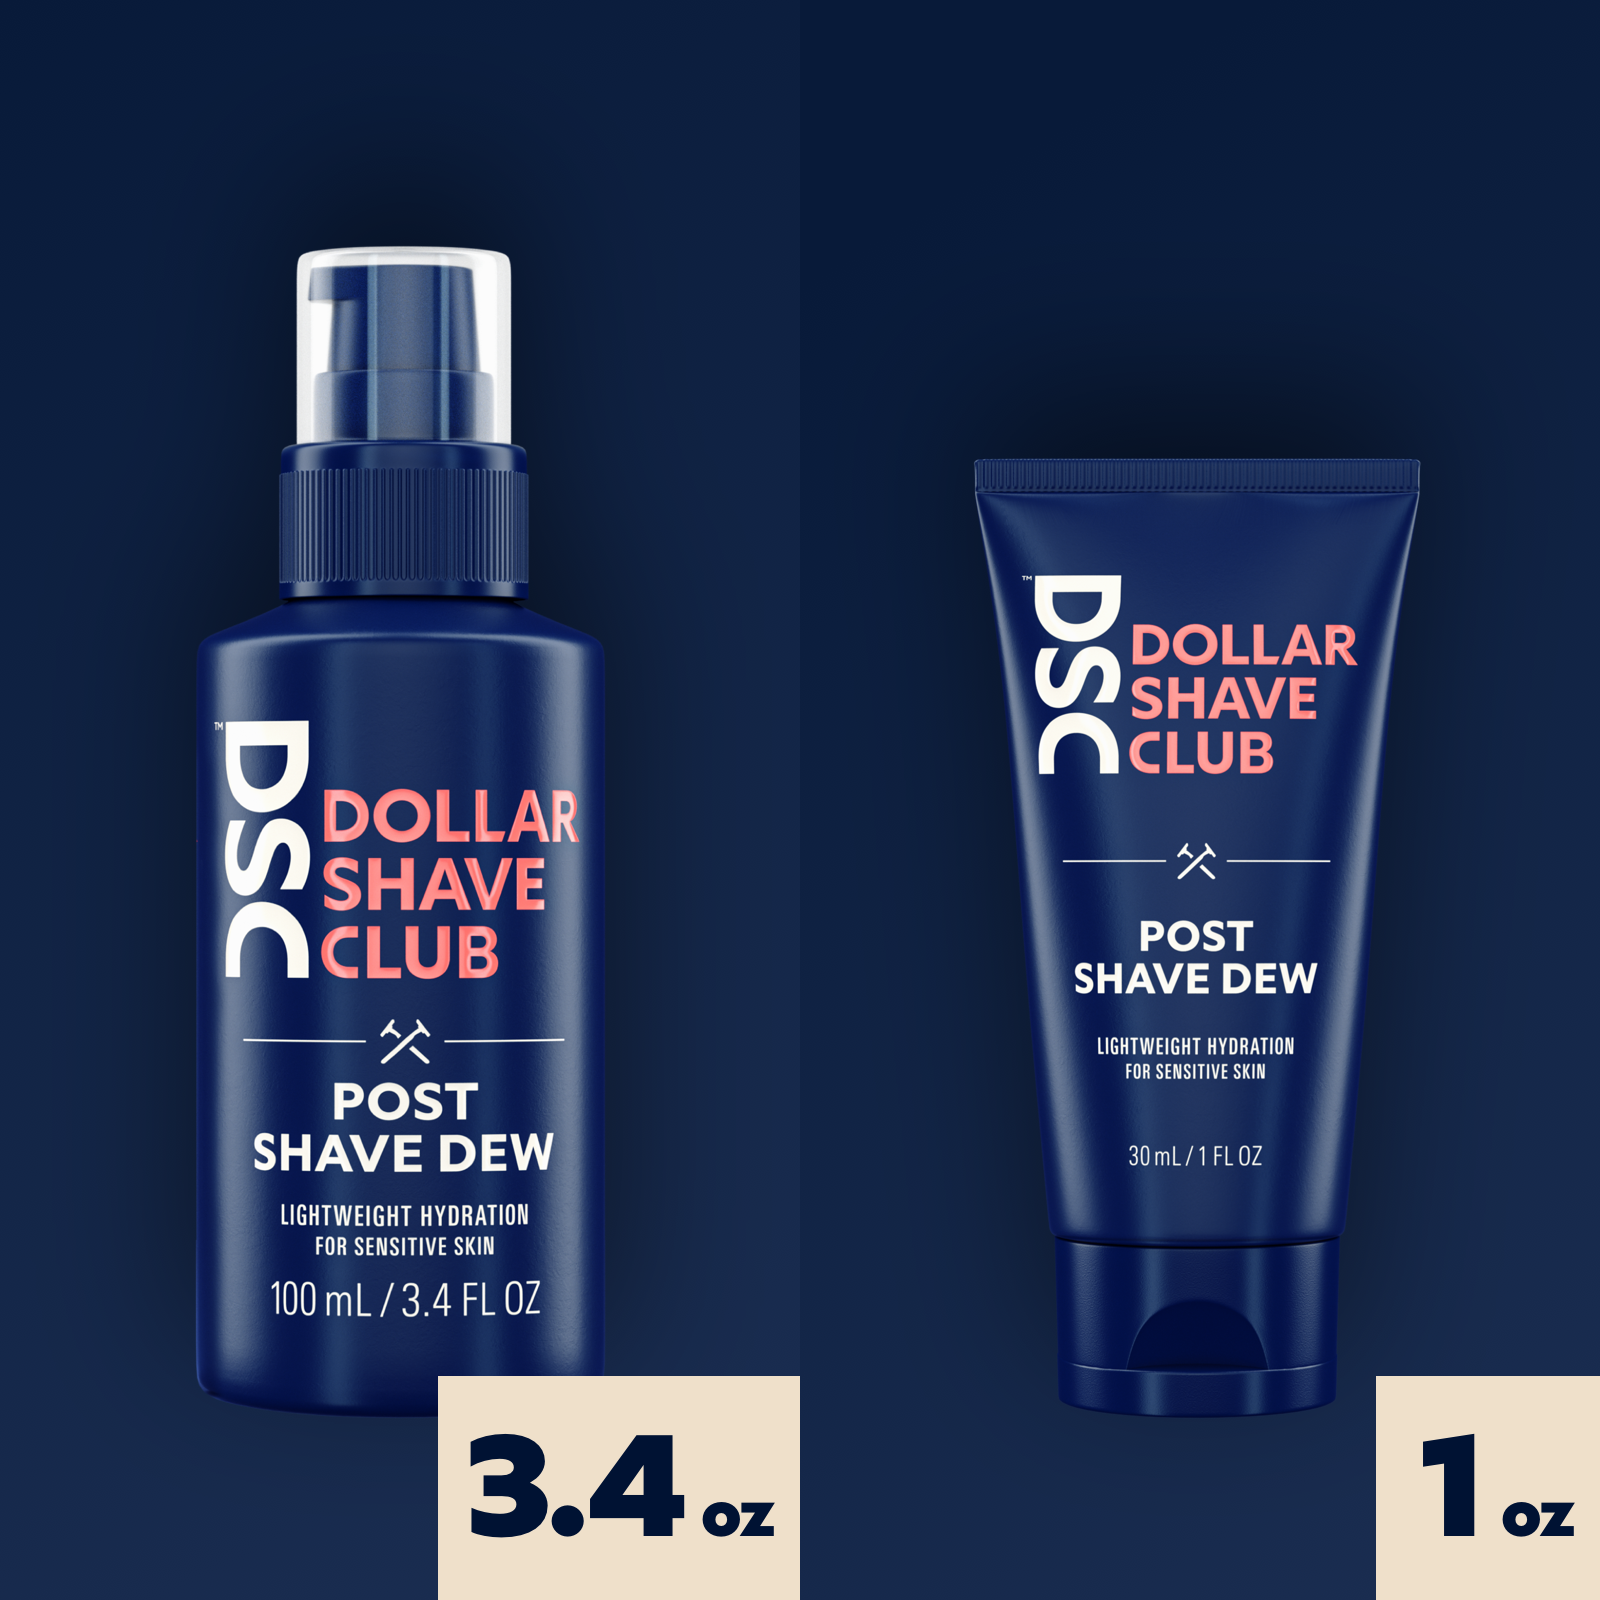 Dollar Shave Club Post Shave Dew trial size product versus full size product.